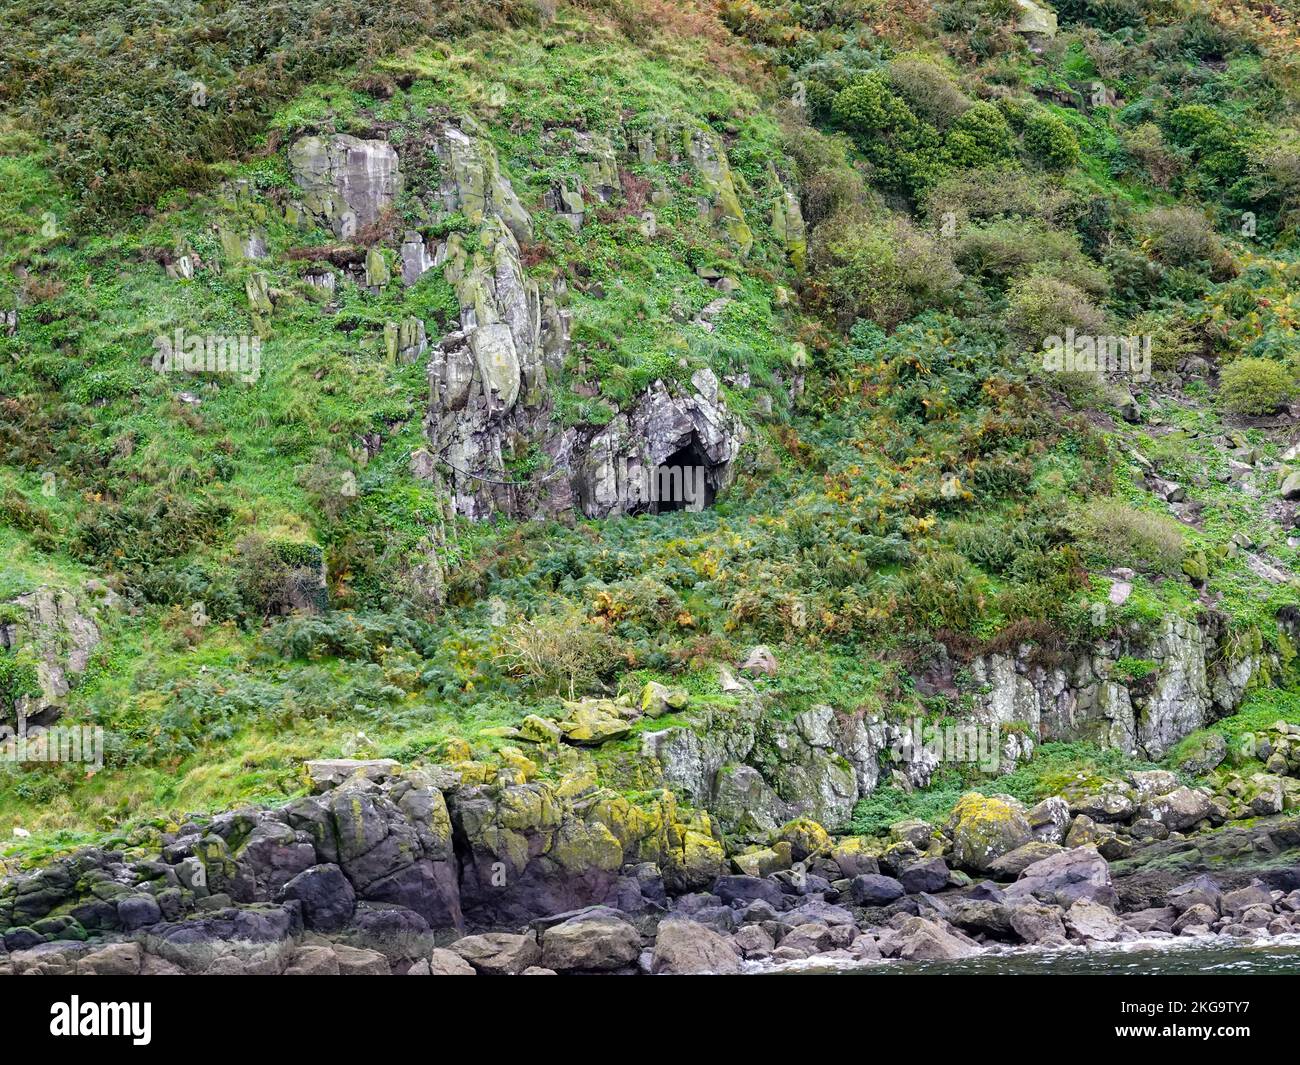 Cave opening in rocky side of Little Cumbrae island, located in the Firth of Clyde, Scotland, UK. Stock Photo